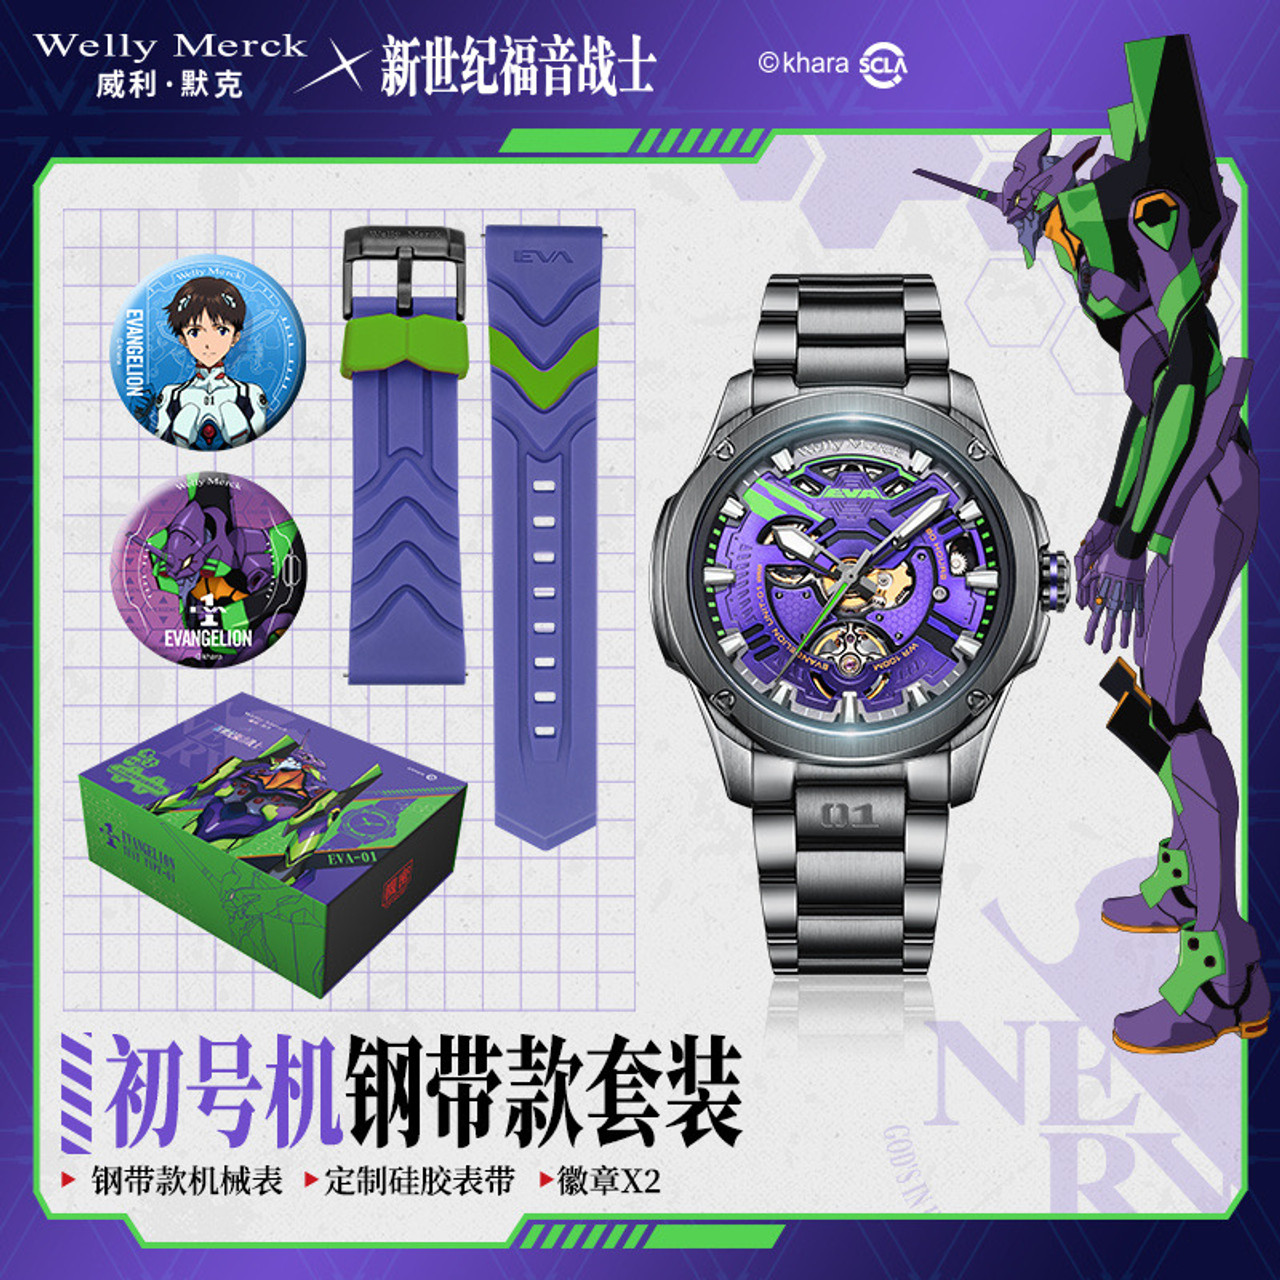 Limited Quantity Neon Genesis Evangelion Watches Now Available to Pre-Order  - Siliconera